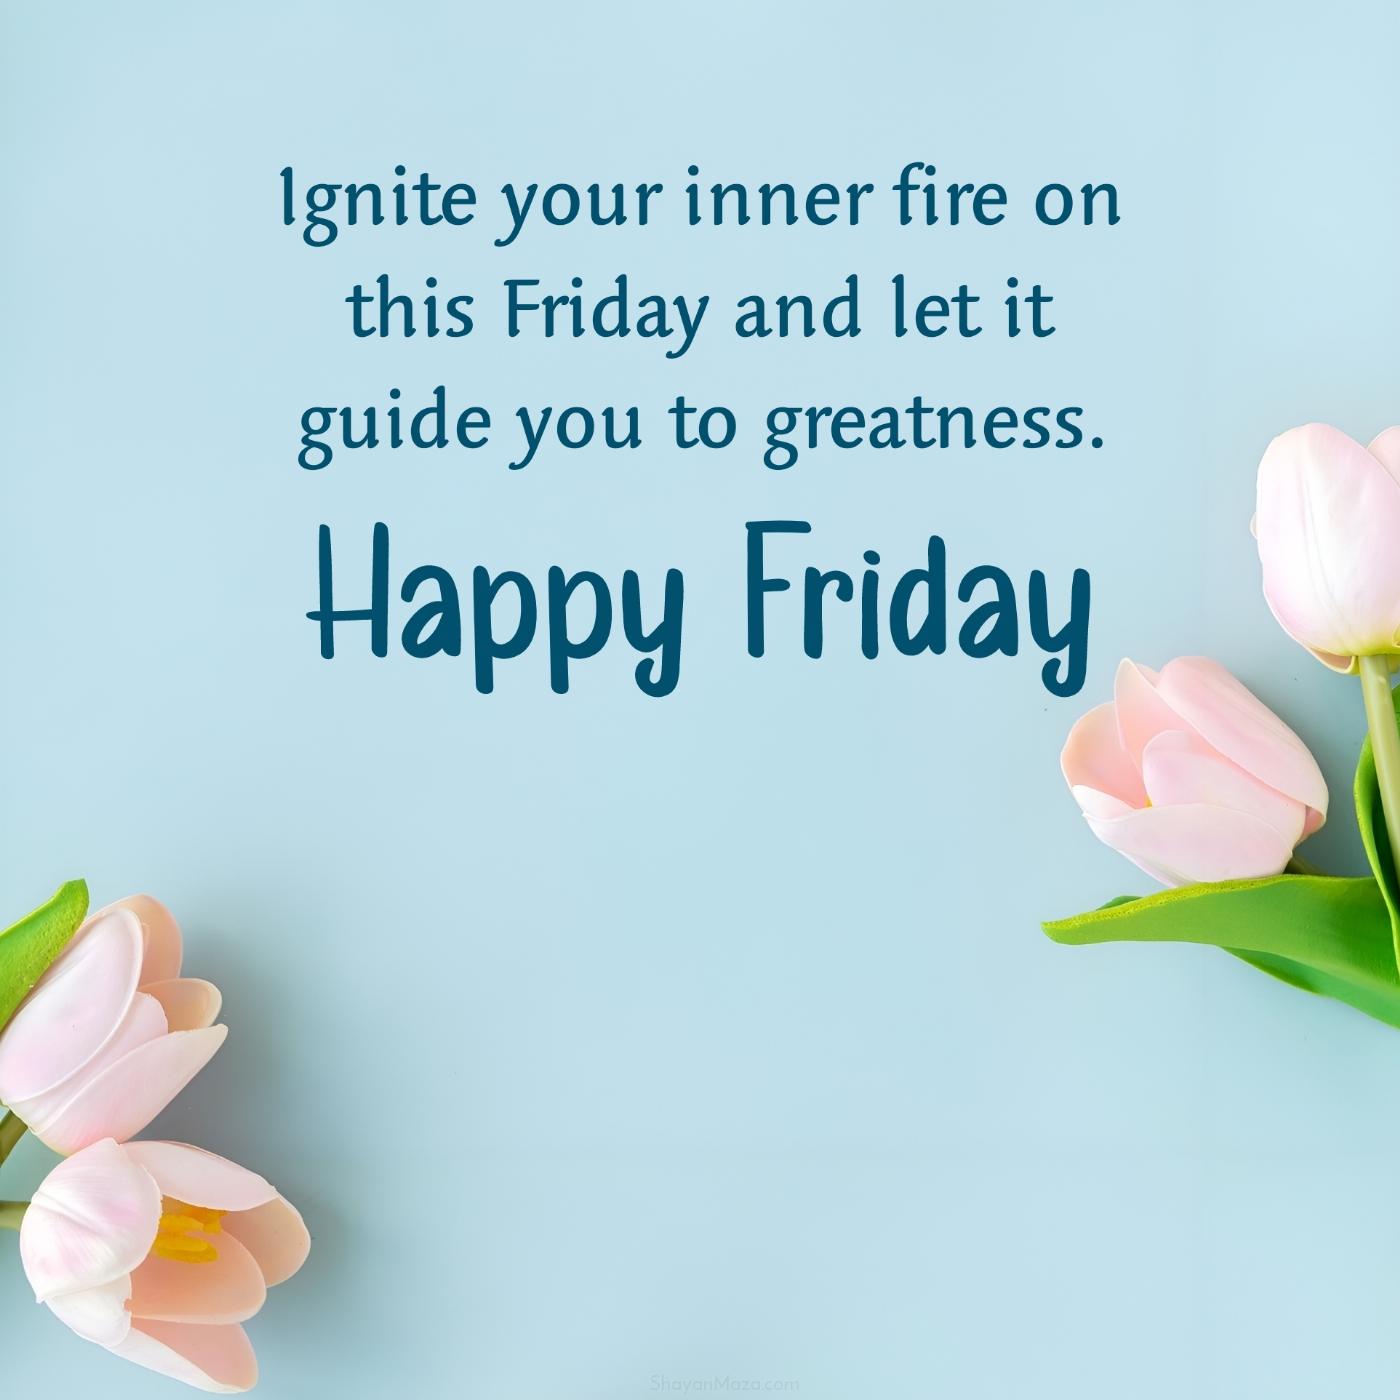 Ignite your inner fire on this Friday and let it guide you to greatness